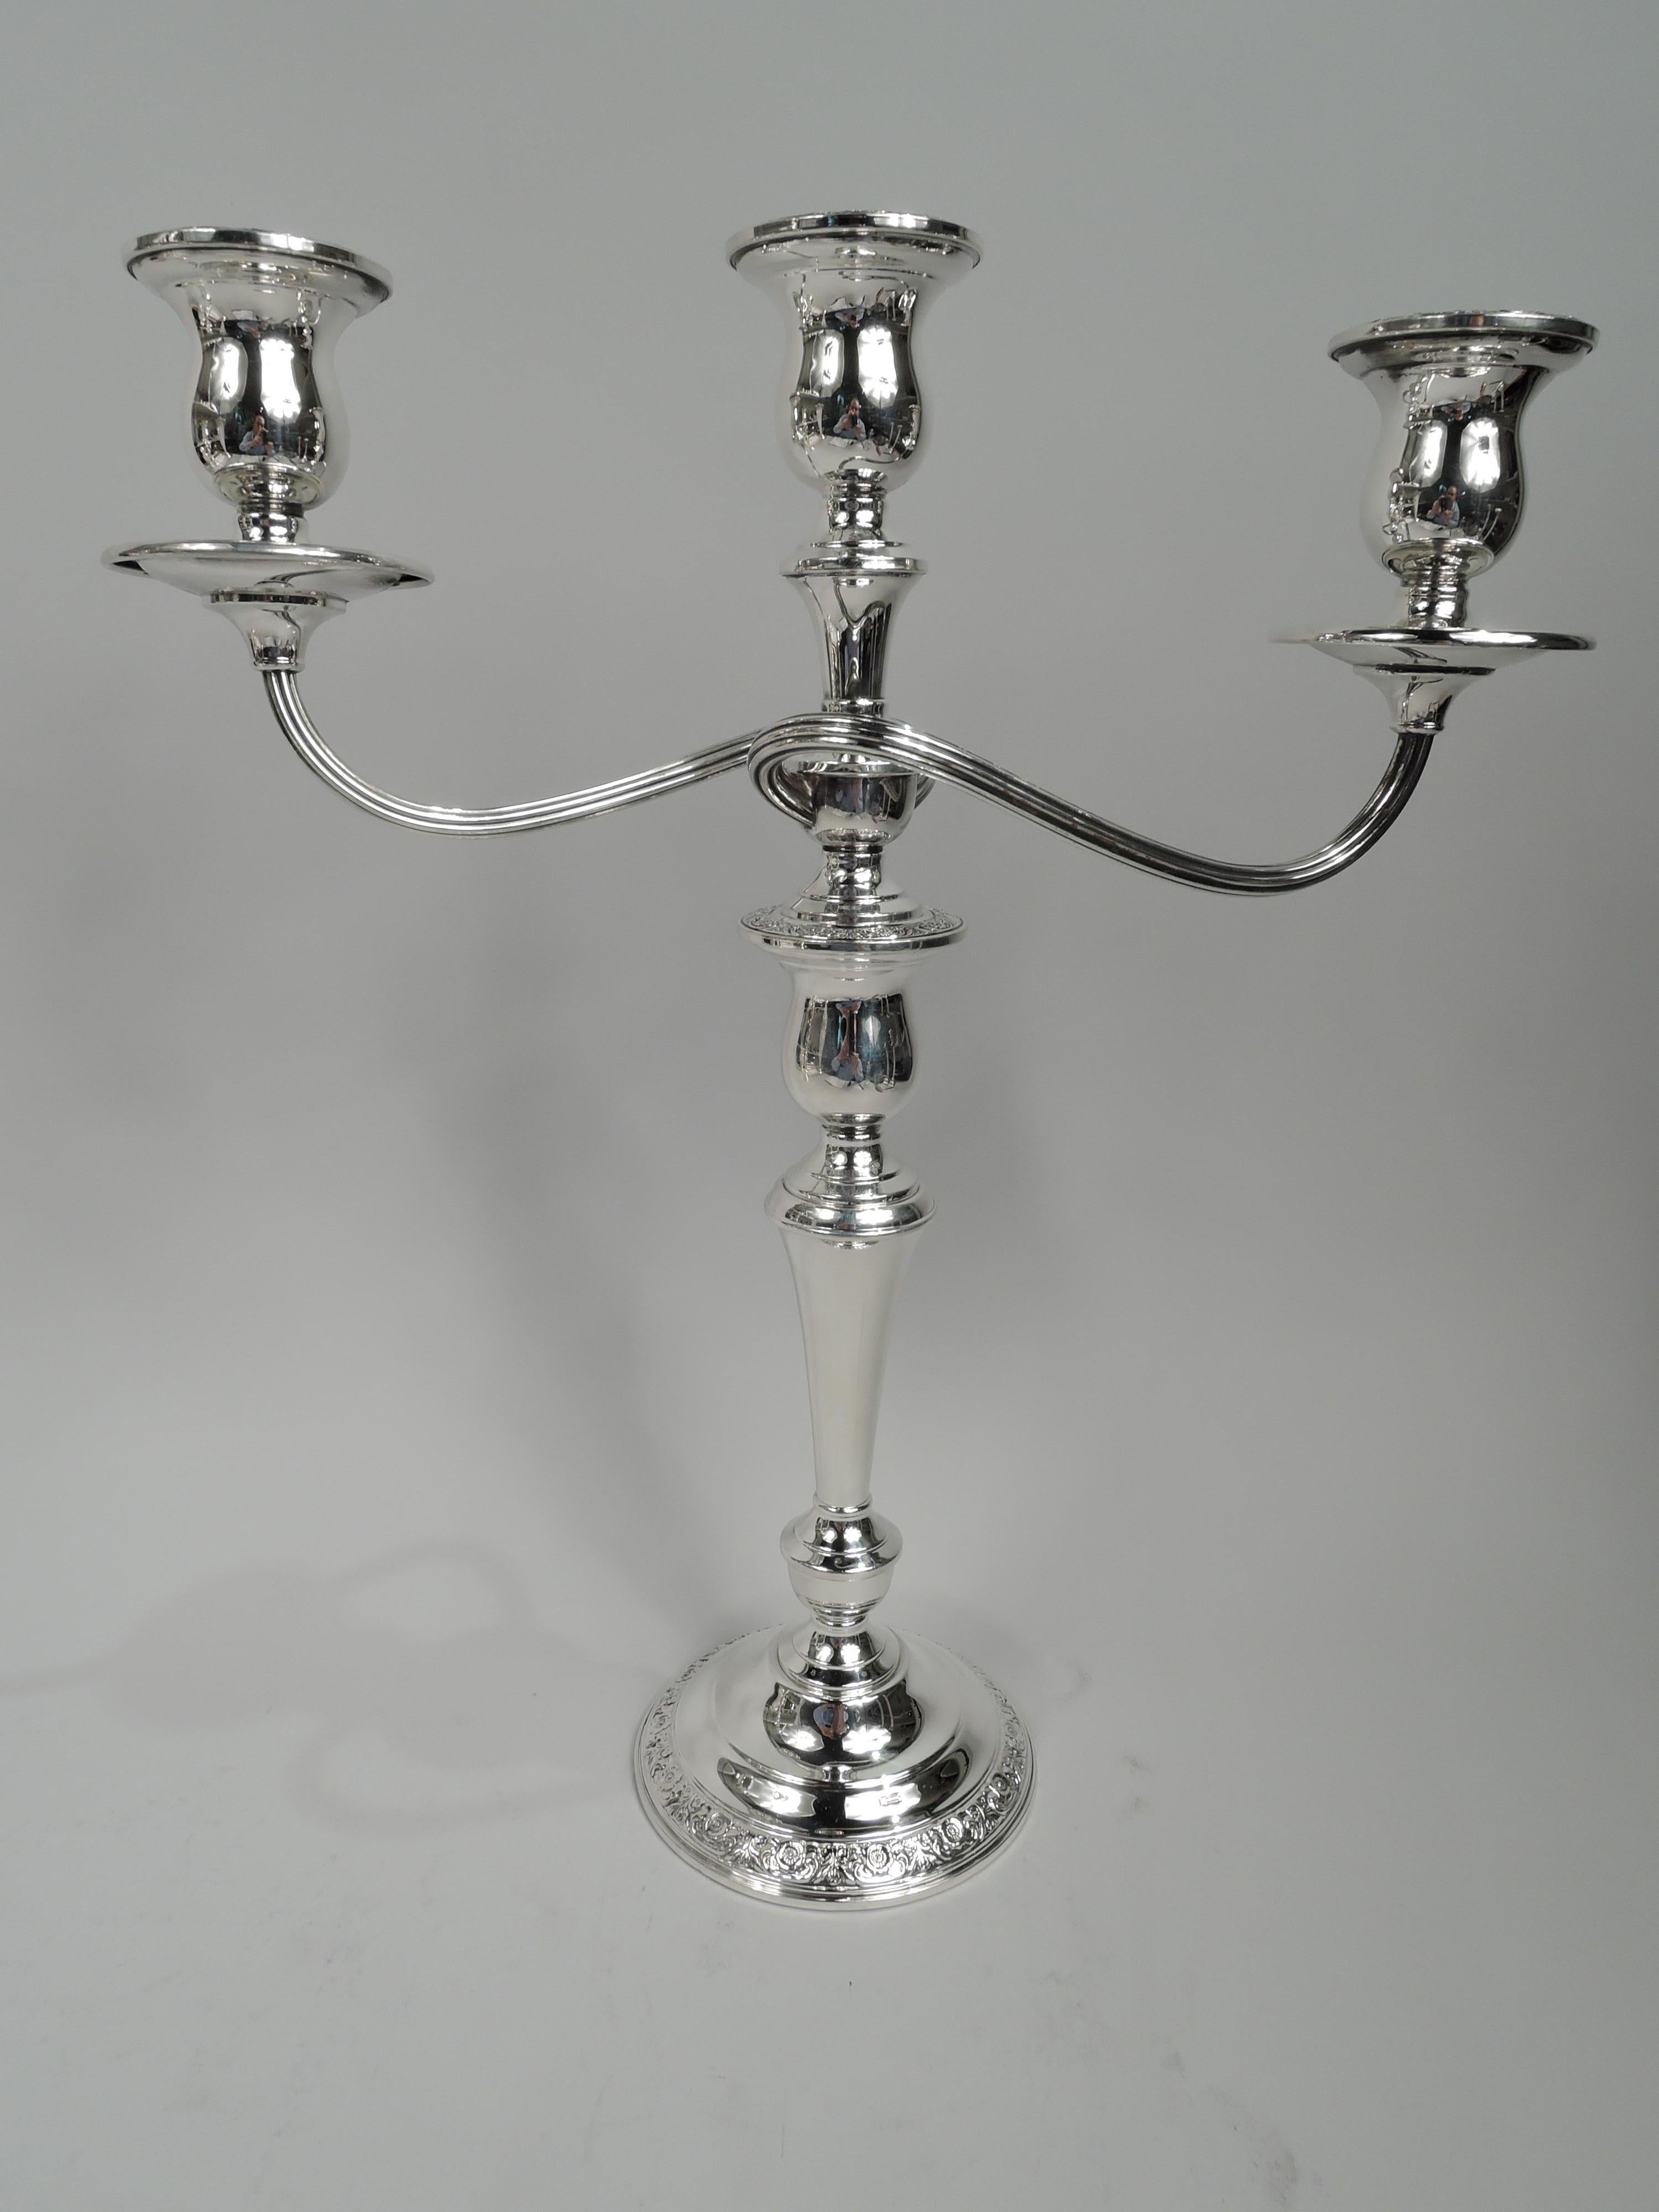 Pair of Prelude sterling silver 3-light candelabra. Made by International in Meriden, Conn. Each: Central socket and 2 wraparound reeded arms, each terminating in single socket. Tapering shaft on vasiform base mounted to stepped and domed foot.